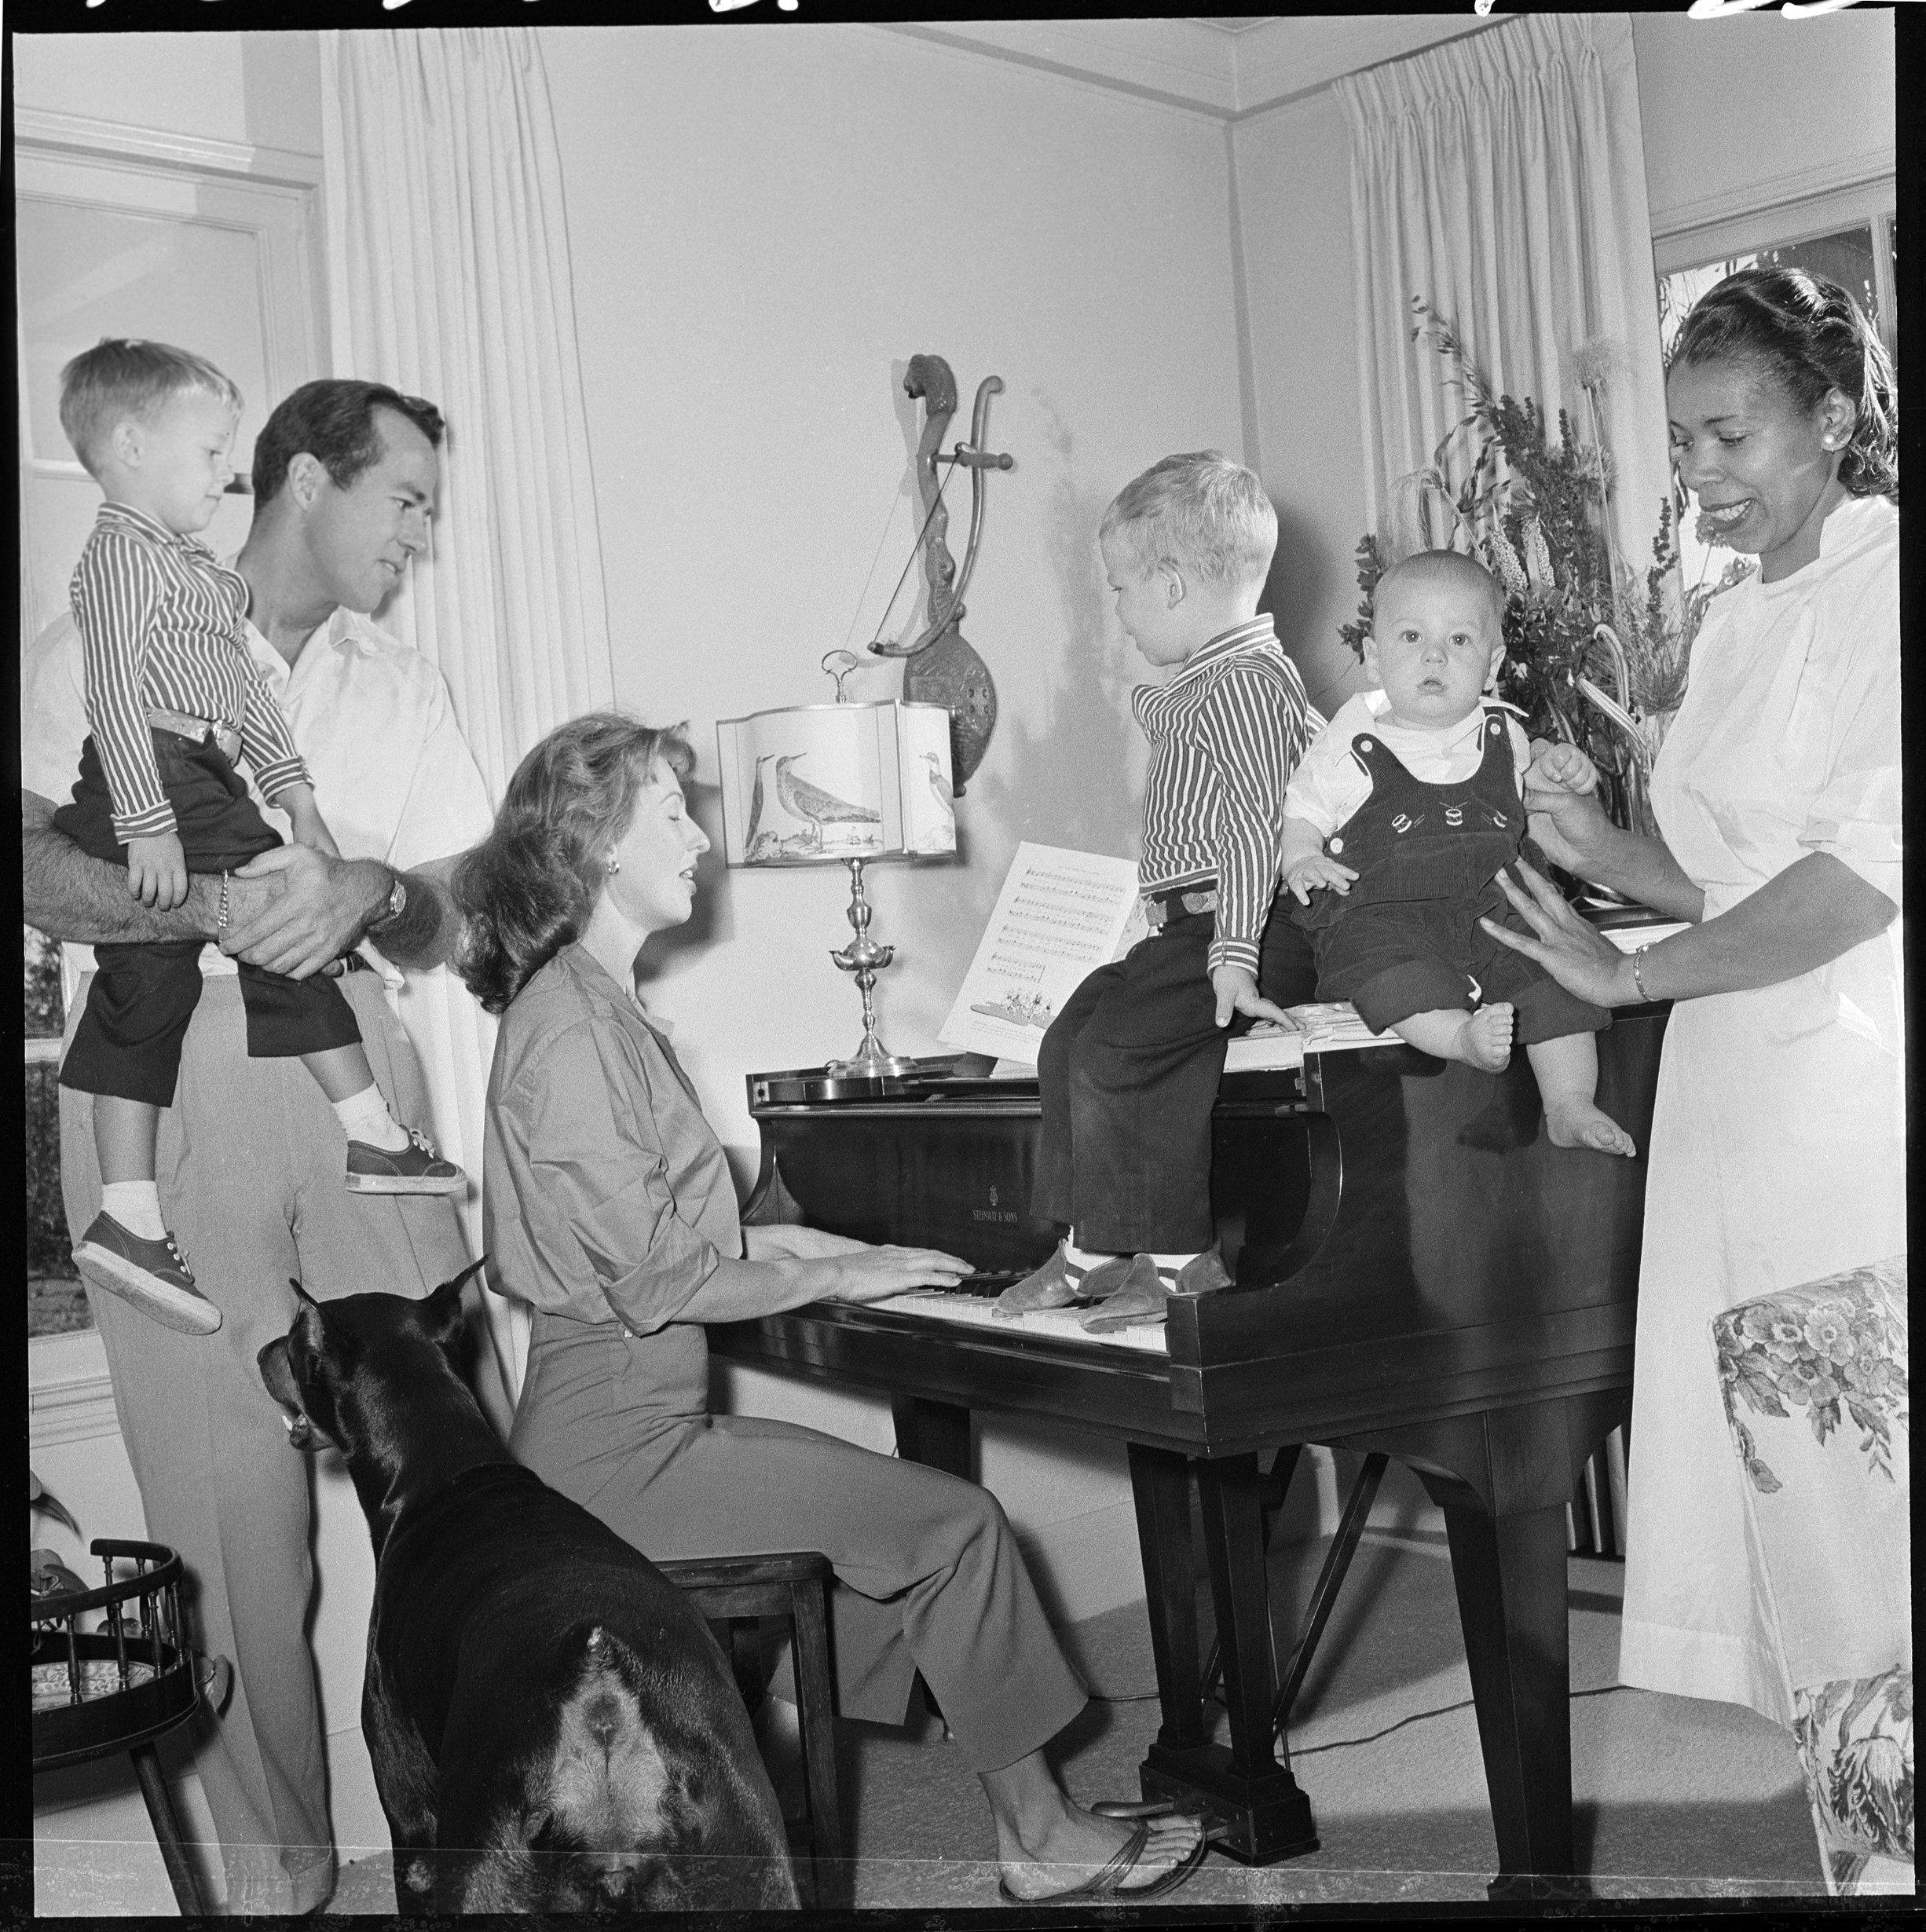 Cloris Leachman pictured playing the piano in the presence of her spouse George Englund, their kids, George Jr., Adam and Bryant and the children's nurse, Julie Harris on October 29, 1957 in Los Angeles. / Source: Getty Images